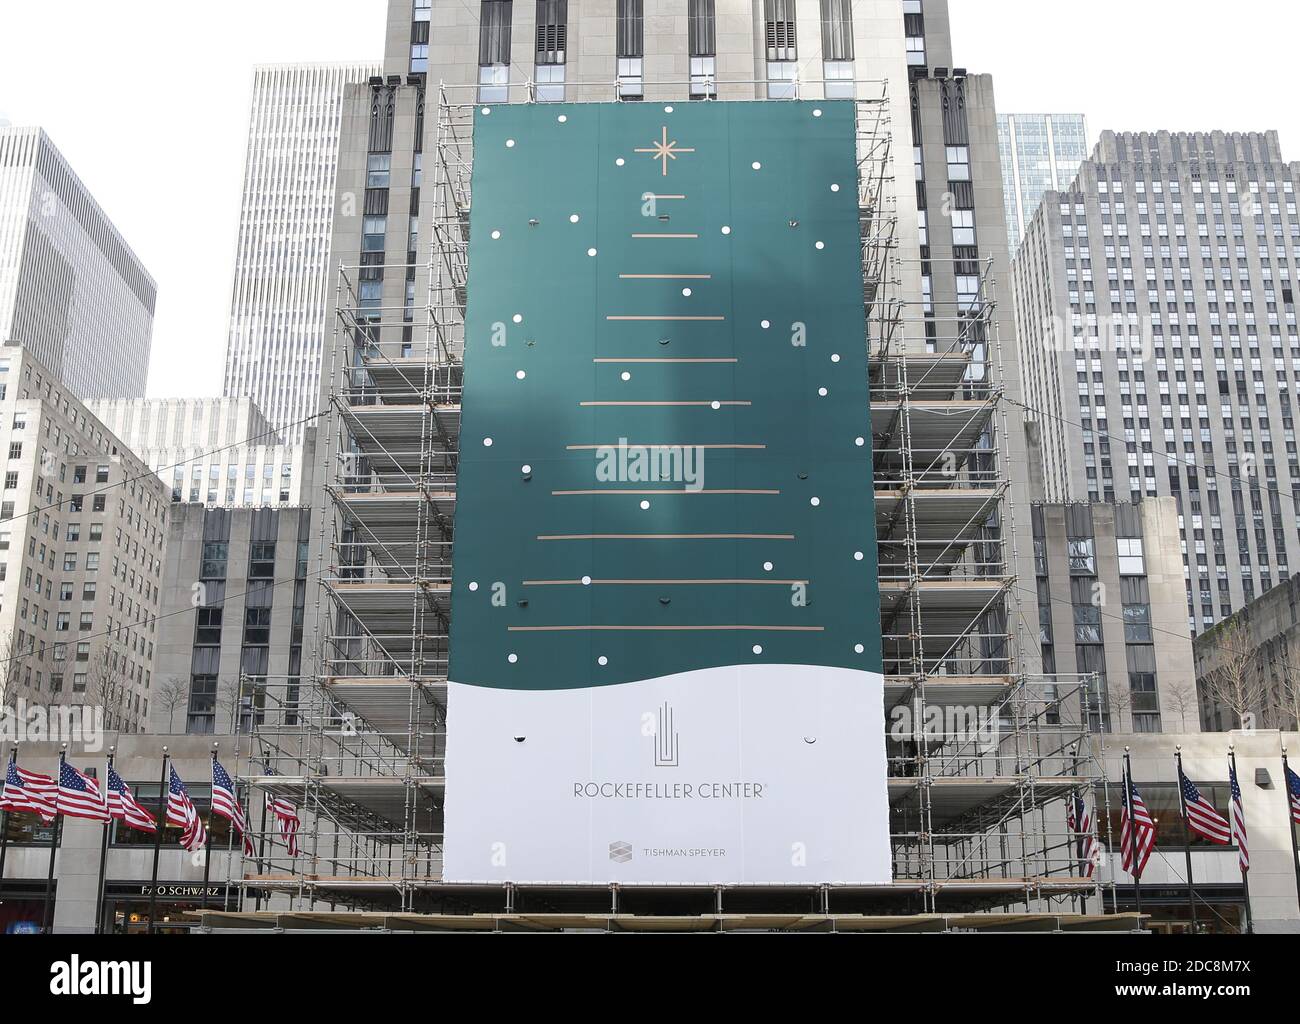 New York, United States. 19th Nov, 2020. Workers continue to prepare the Rockefeller Center Christmas Tree for the tree lighting scheduled for December 4th at Rockefeller Plaza in New York City on Thursday, November 19, 2020. Photo by John Angelillo/UPI Credit: UPI/Alamy Live News Stock Photo